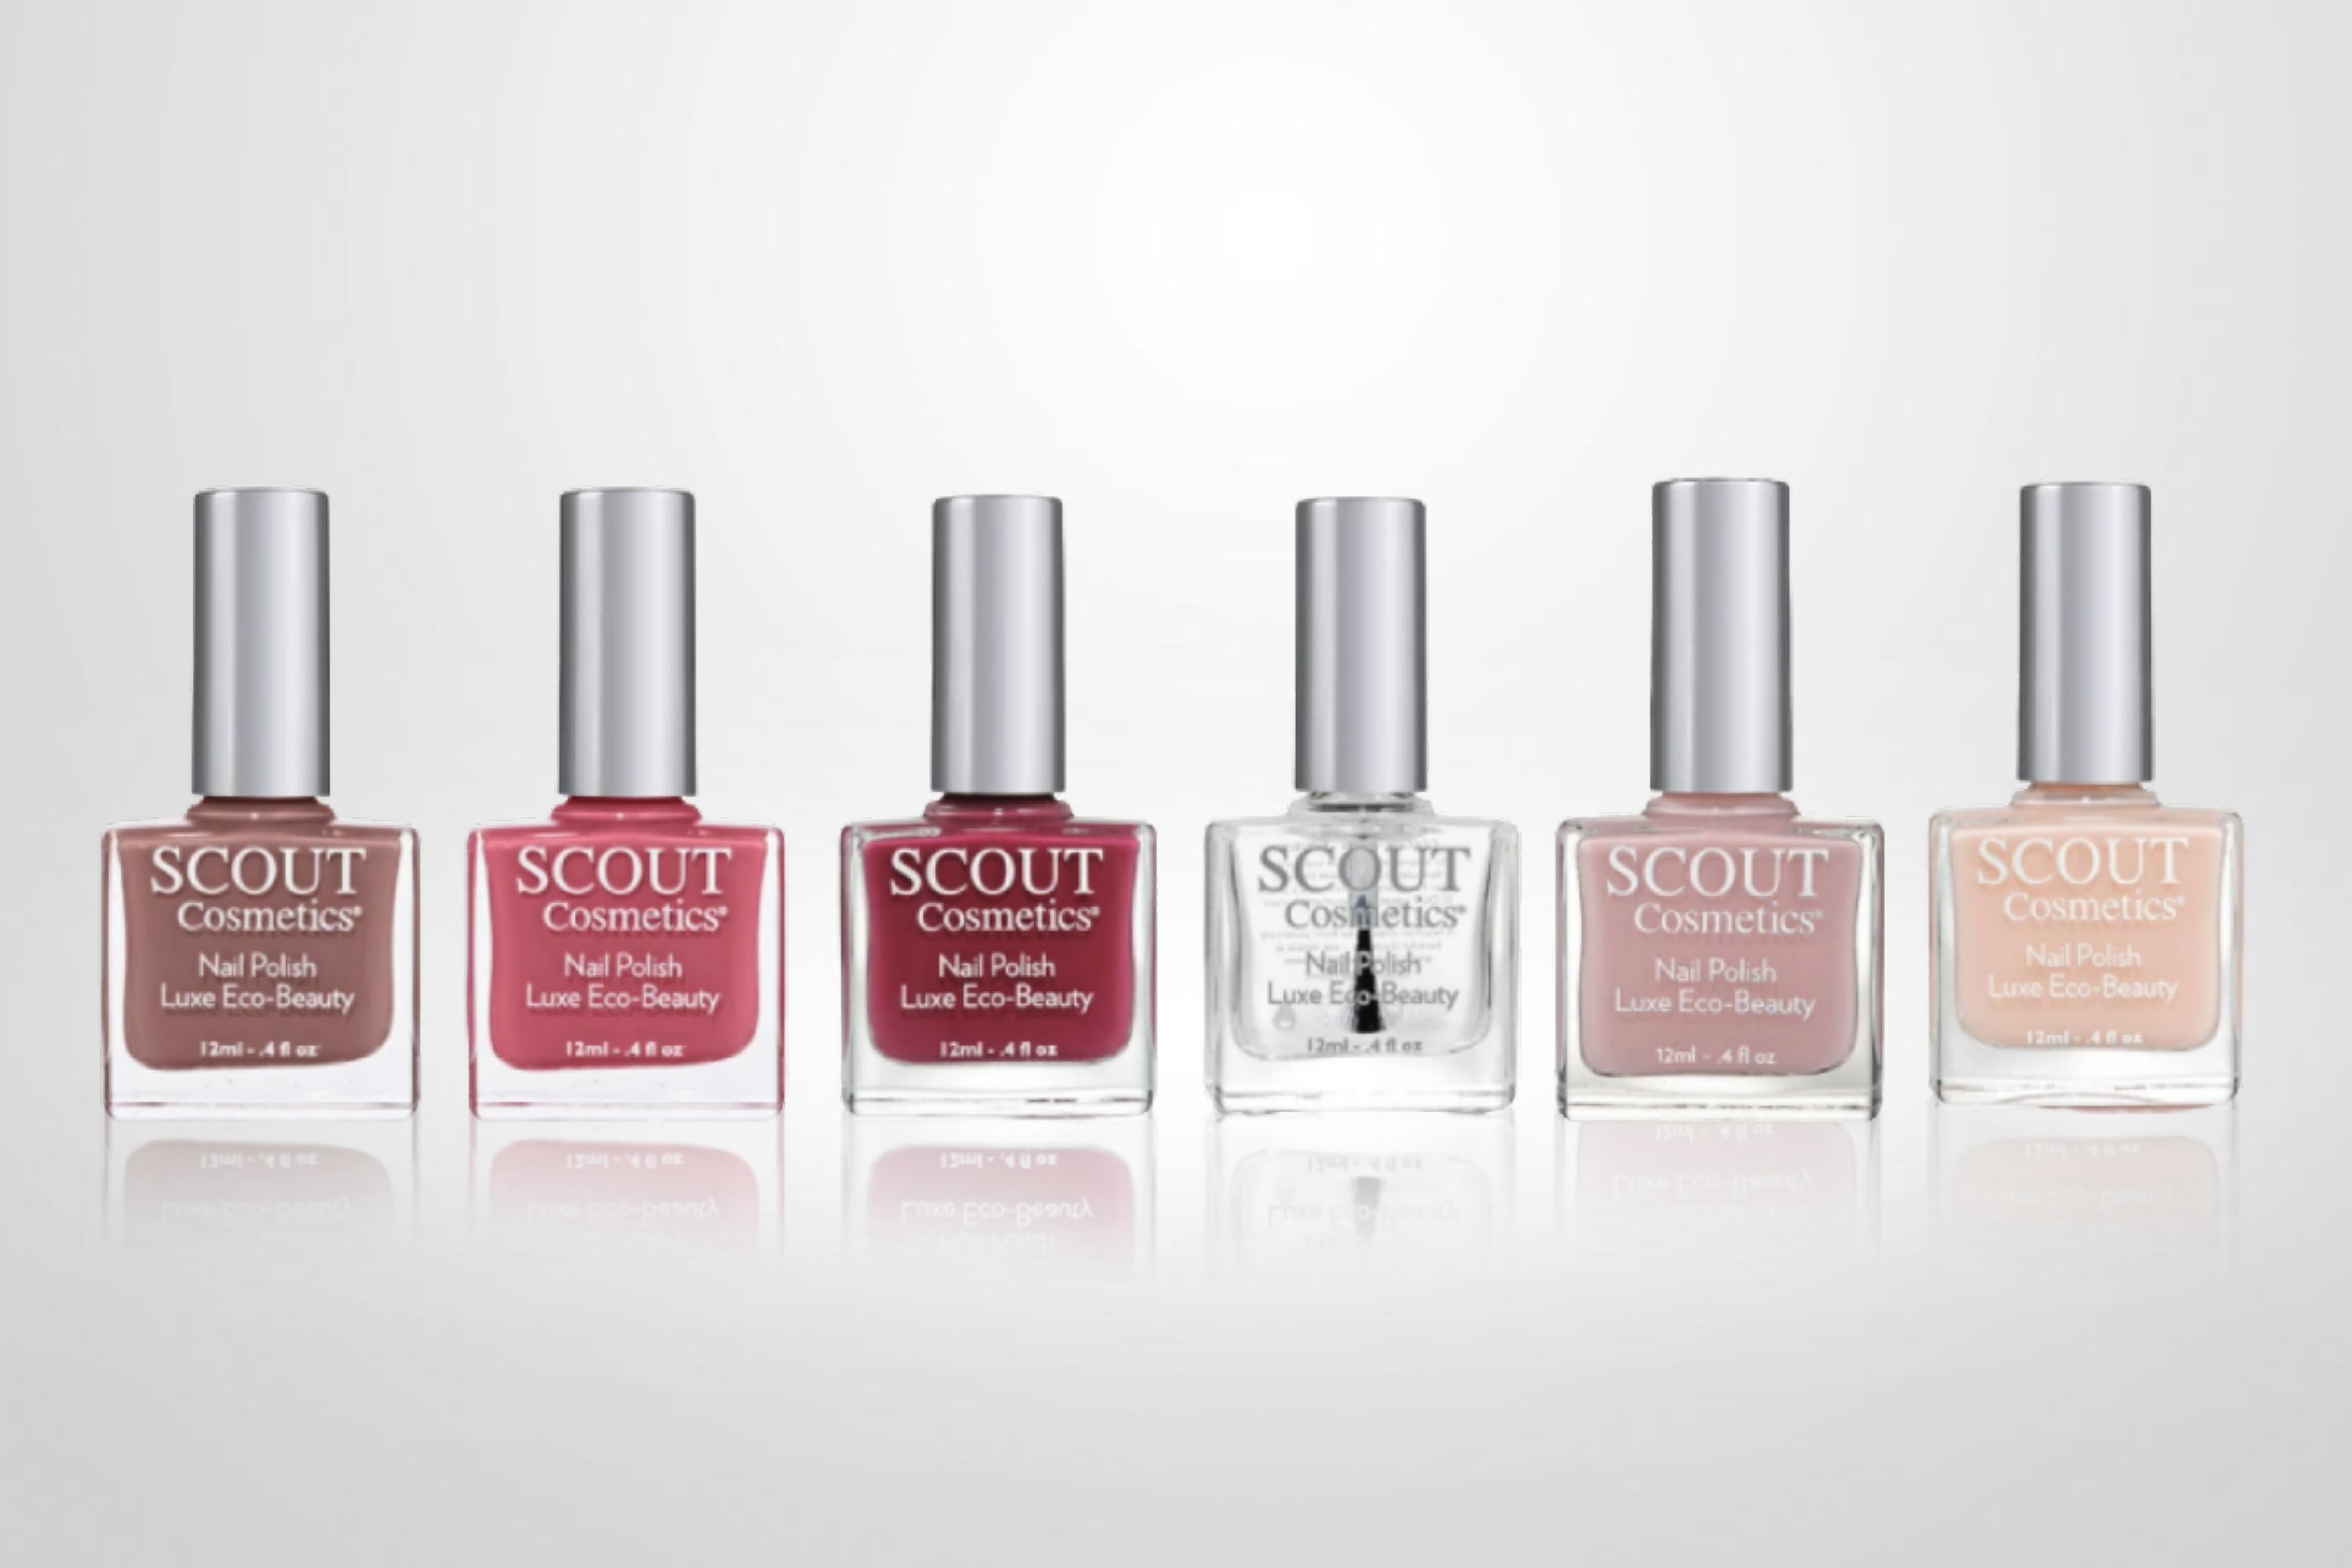 Breathable, Anti-Fungal Nail Polishes - Are They Any Good?